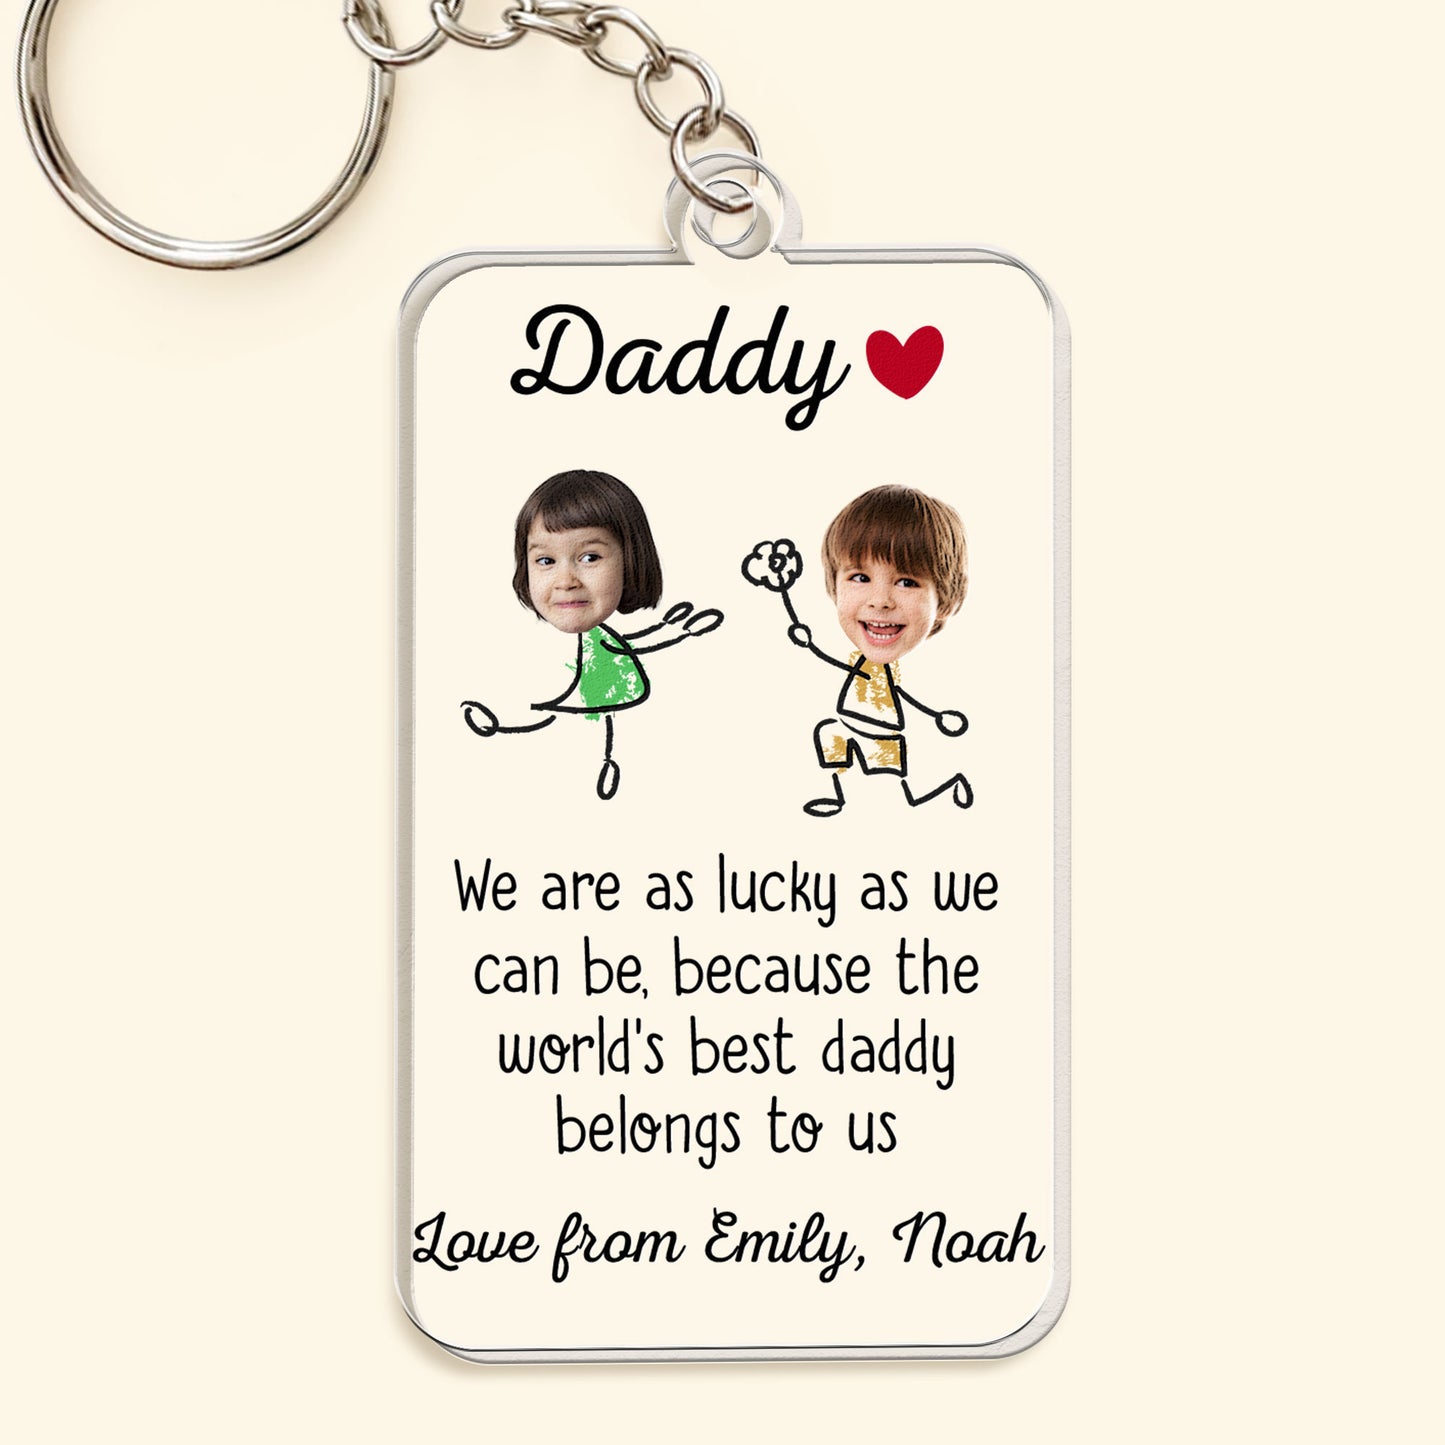 The World's Best Daddy Belongs To Me - Personalized Acrylic Photo Keychain